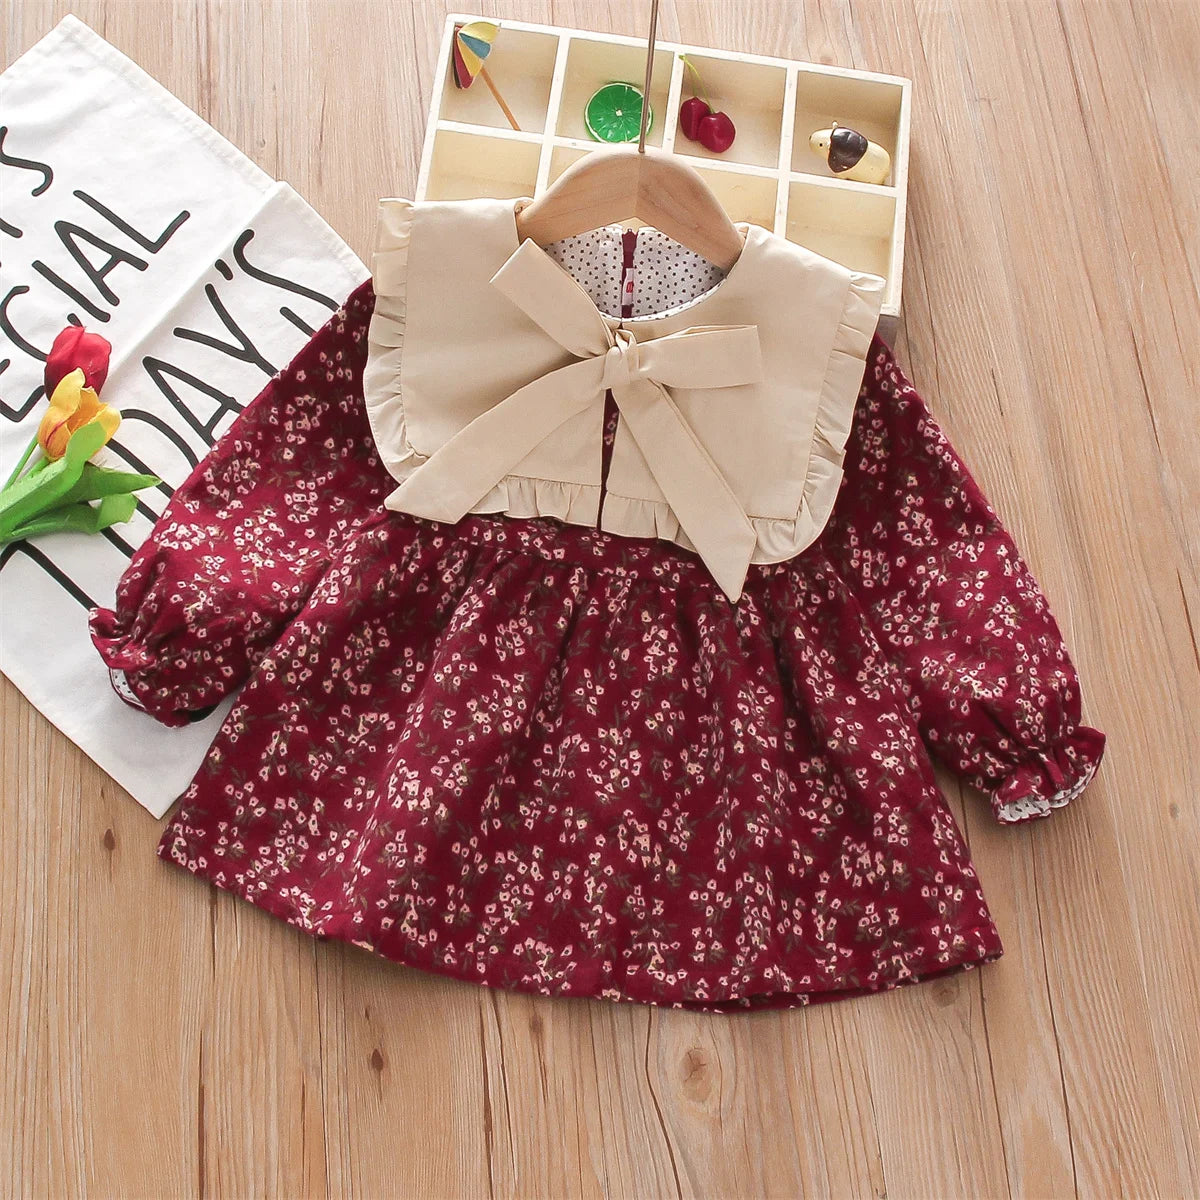 Autumn And Winter Girls' Dress New Countryside Fragmented Flower Bow Lace Lapel Sweet Long Sleeve Forest Style Wear